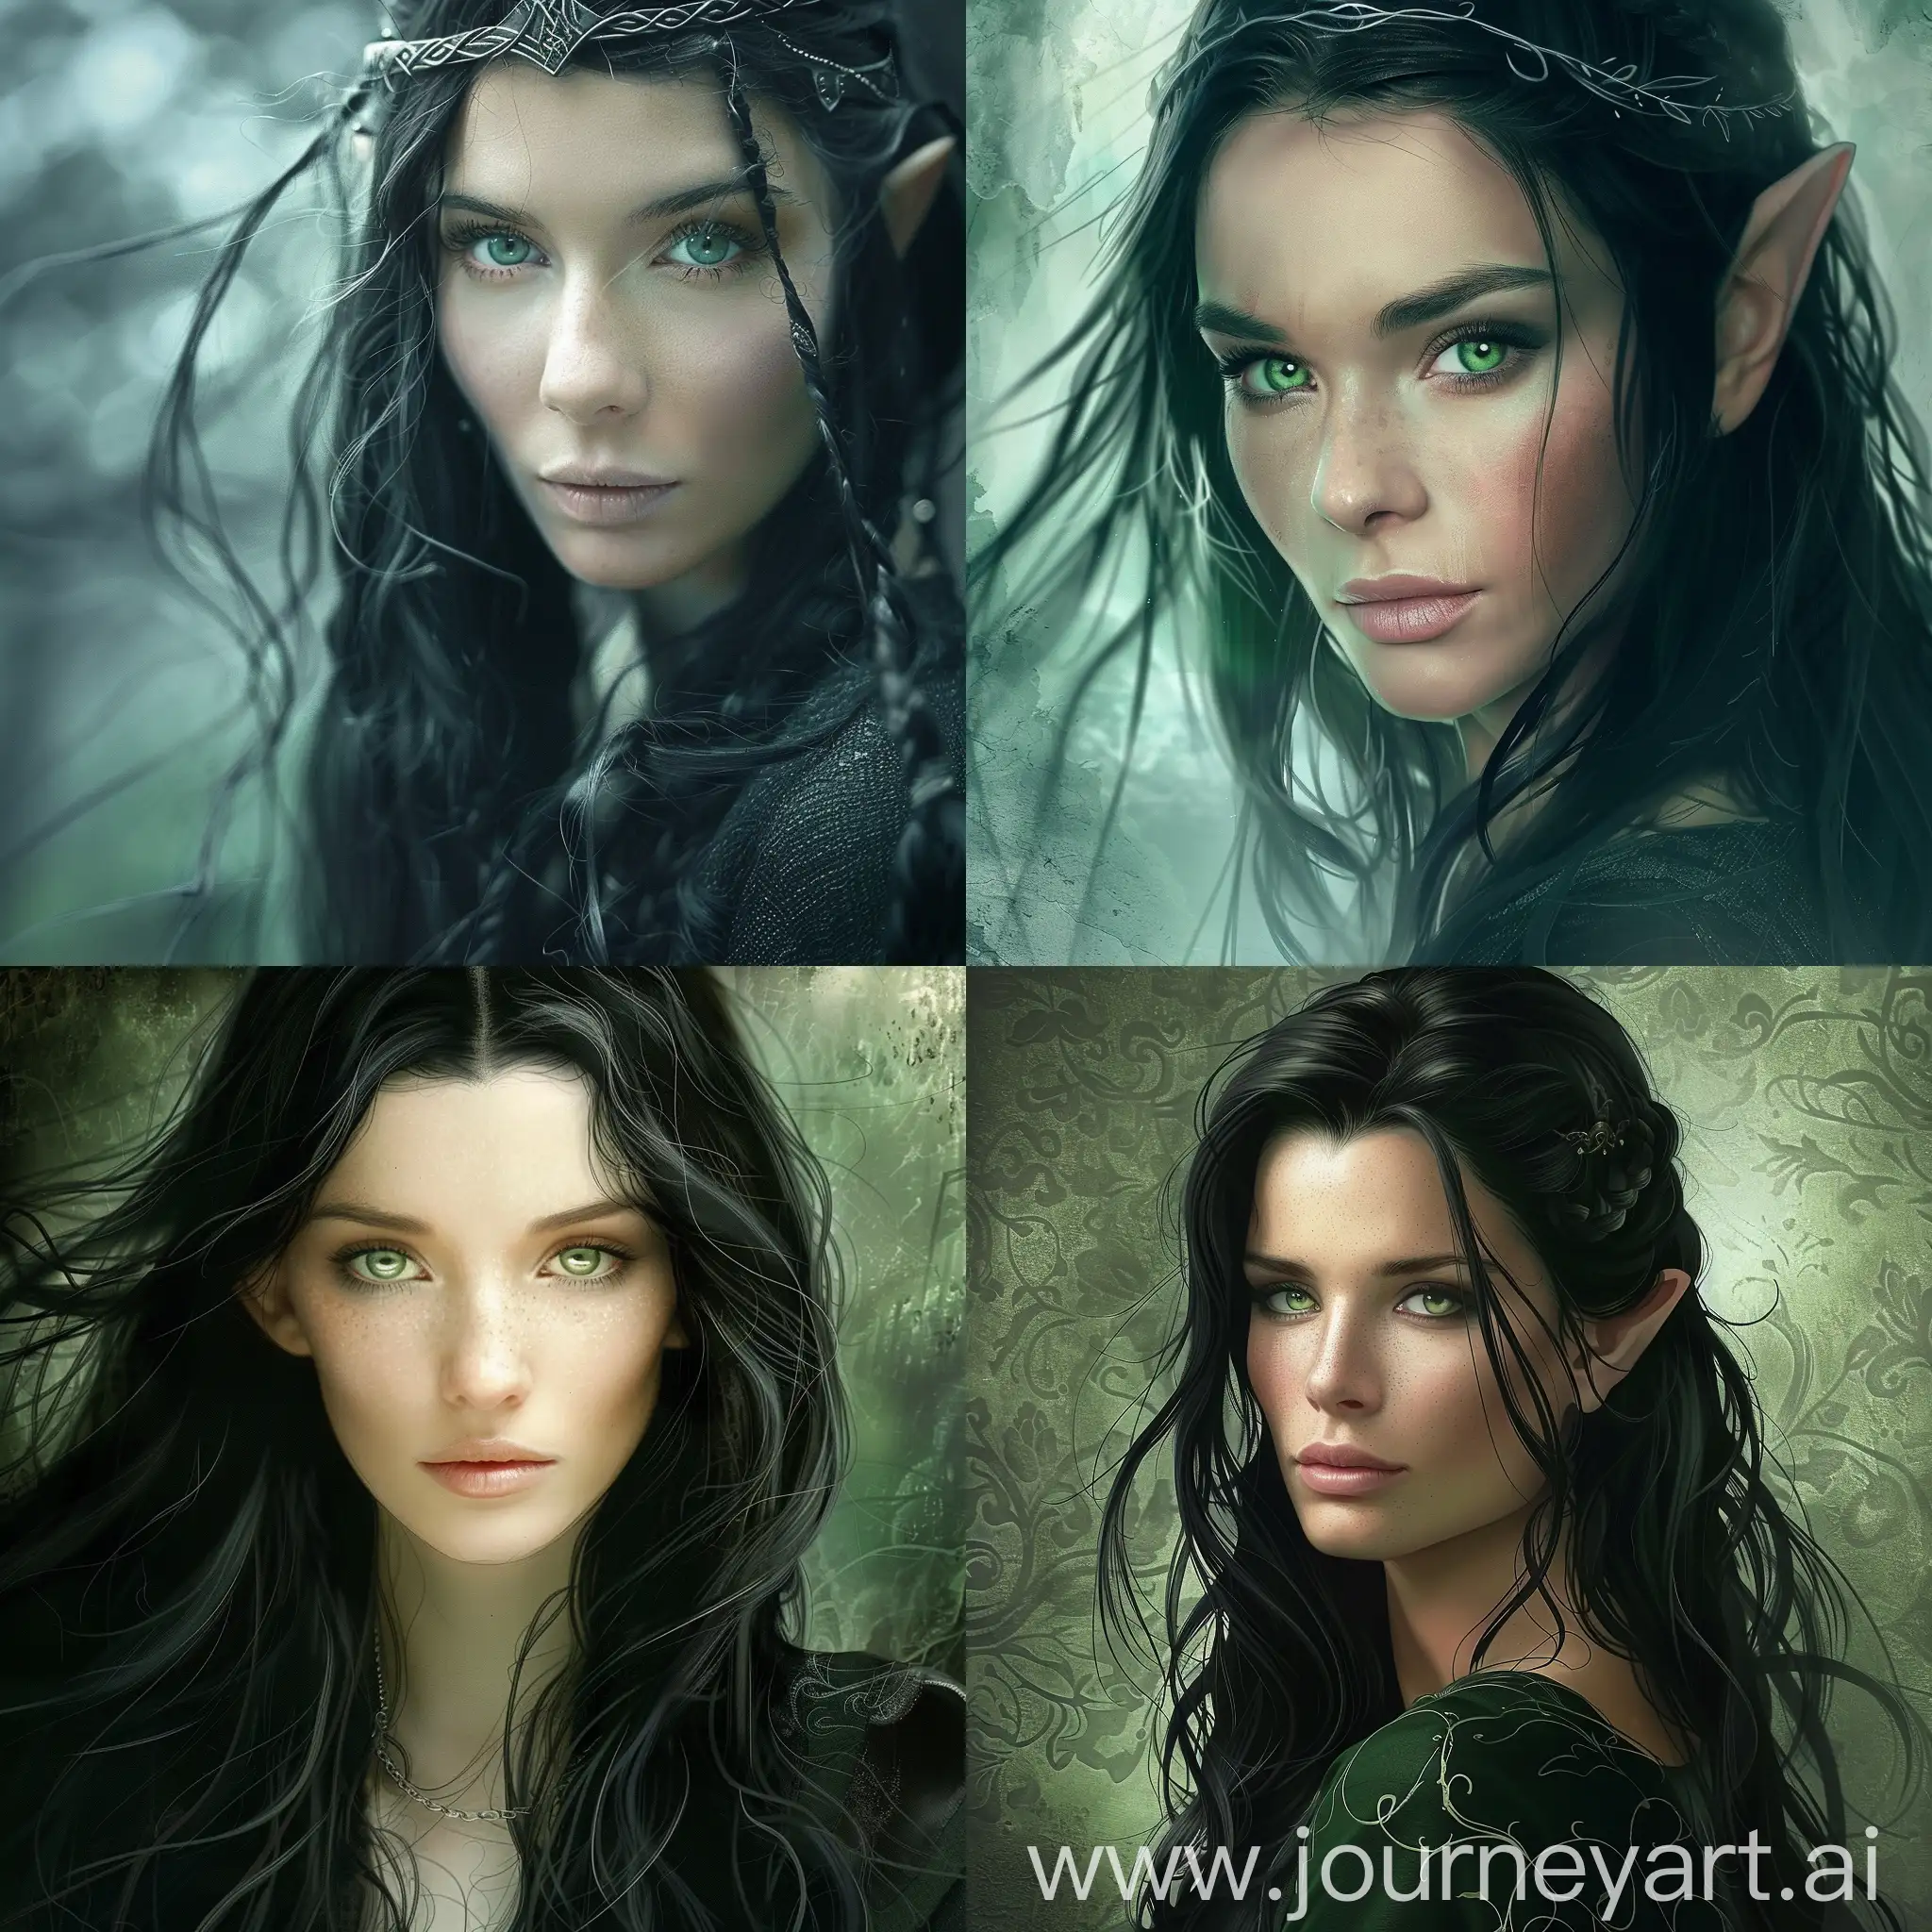 Enchanting-Elven-Woman-with-Long-Black-Hair-and-Pale-Green-Eyes